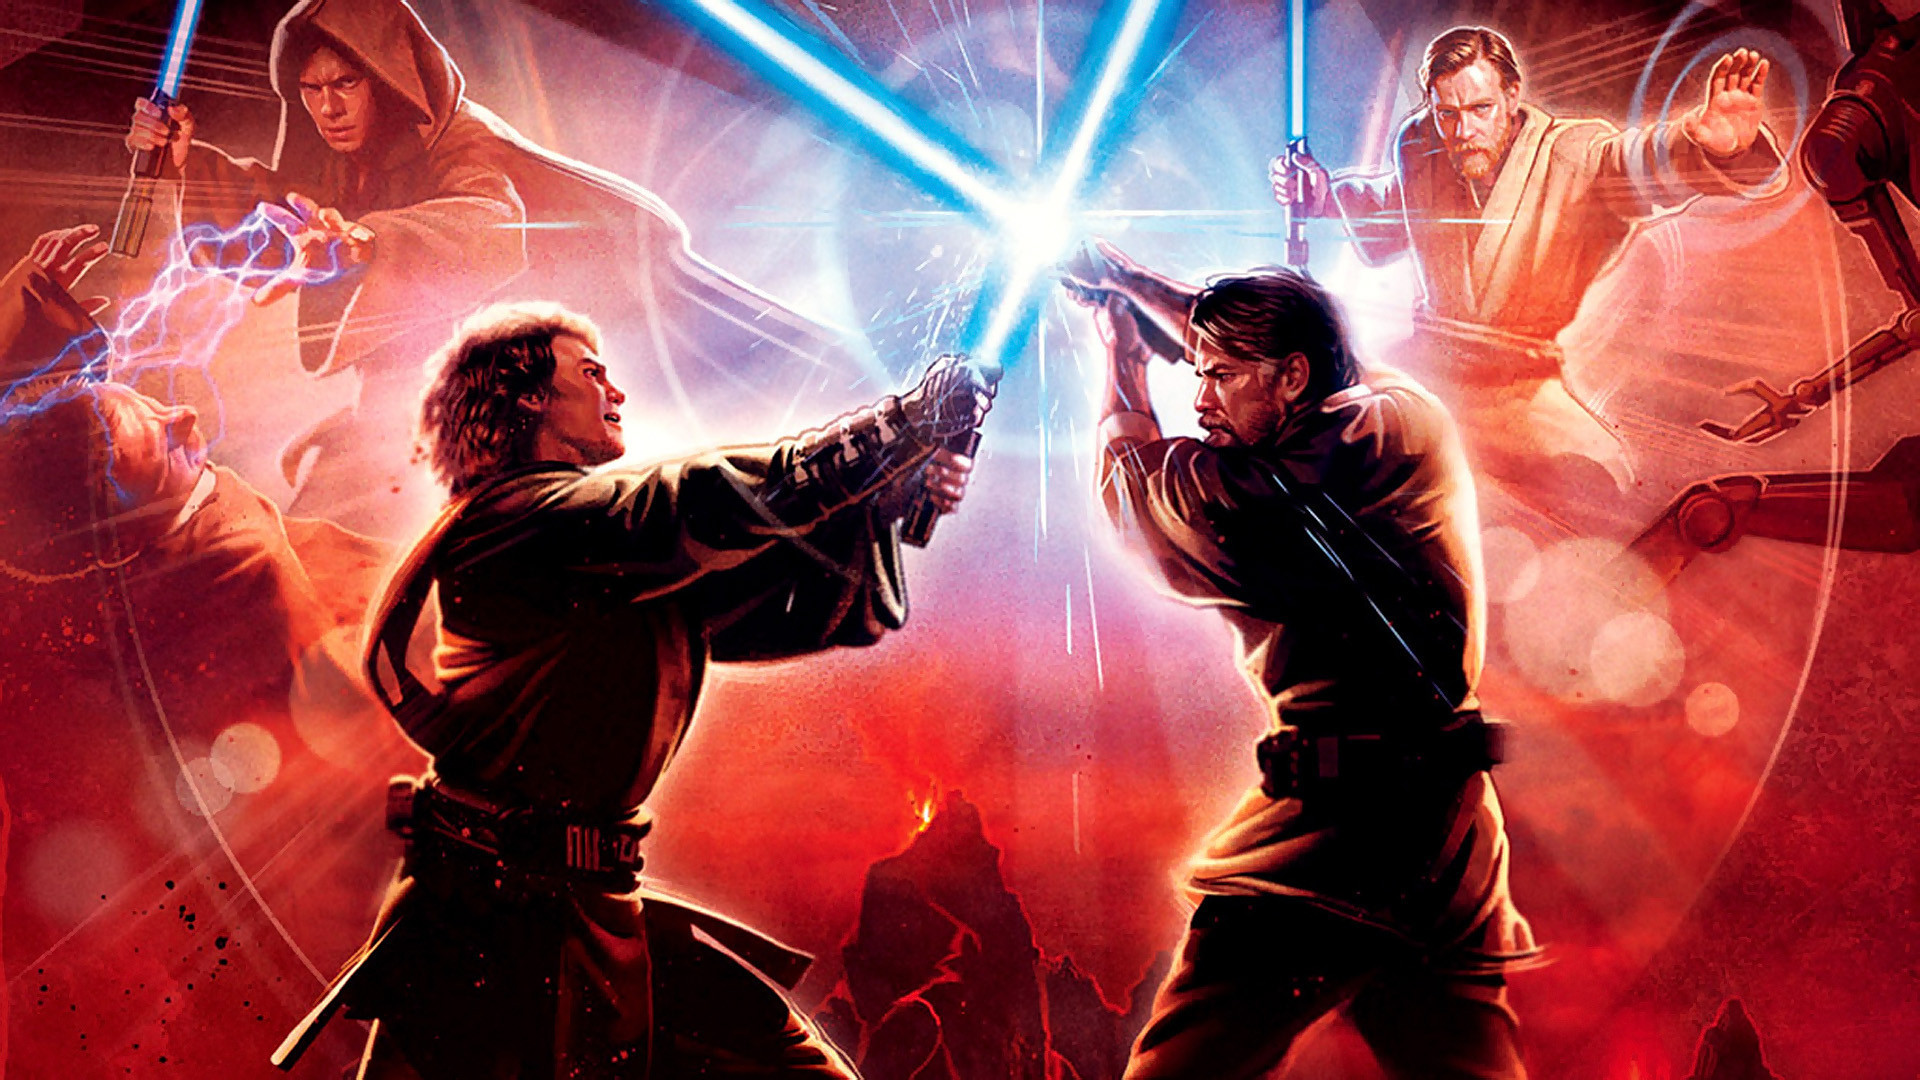 1920x1080 Star Wars Episode III: Revenge of the Sith HD Wallpaper | Background Image  |  | ID:530478 - Wallpaper Abyss